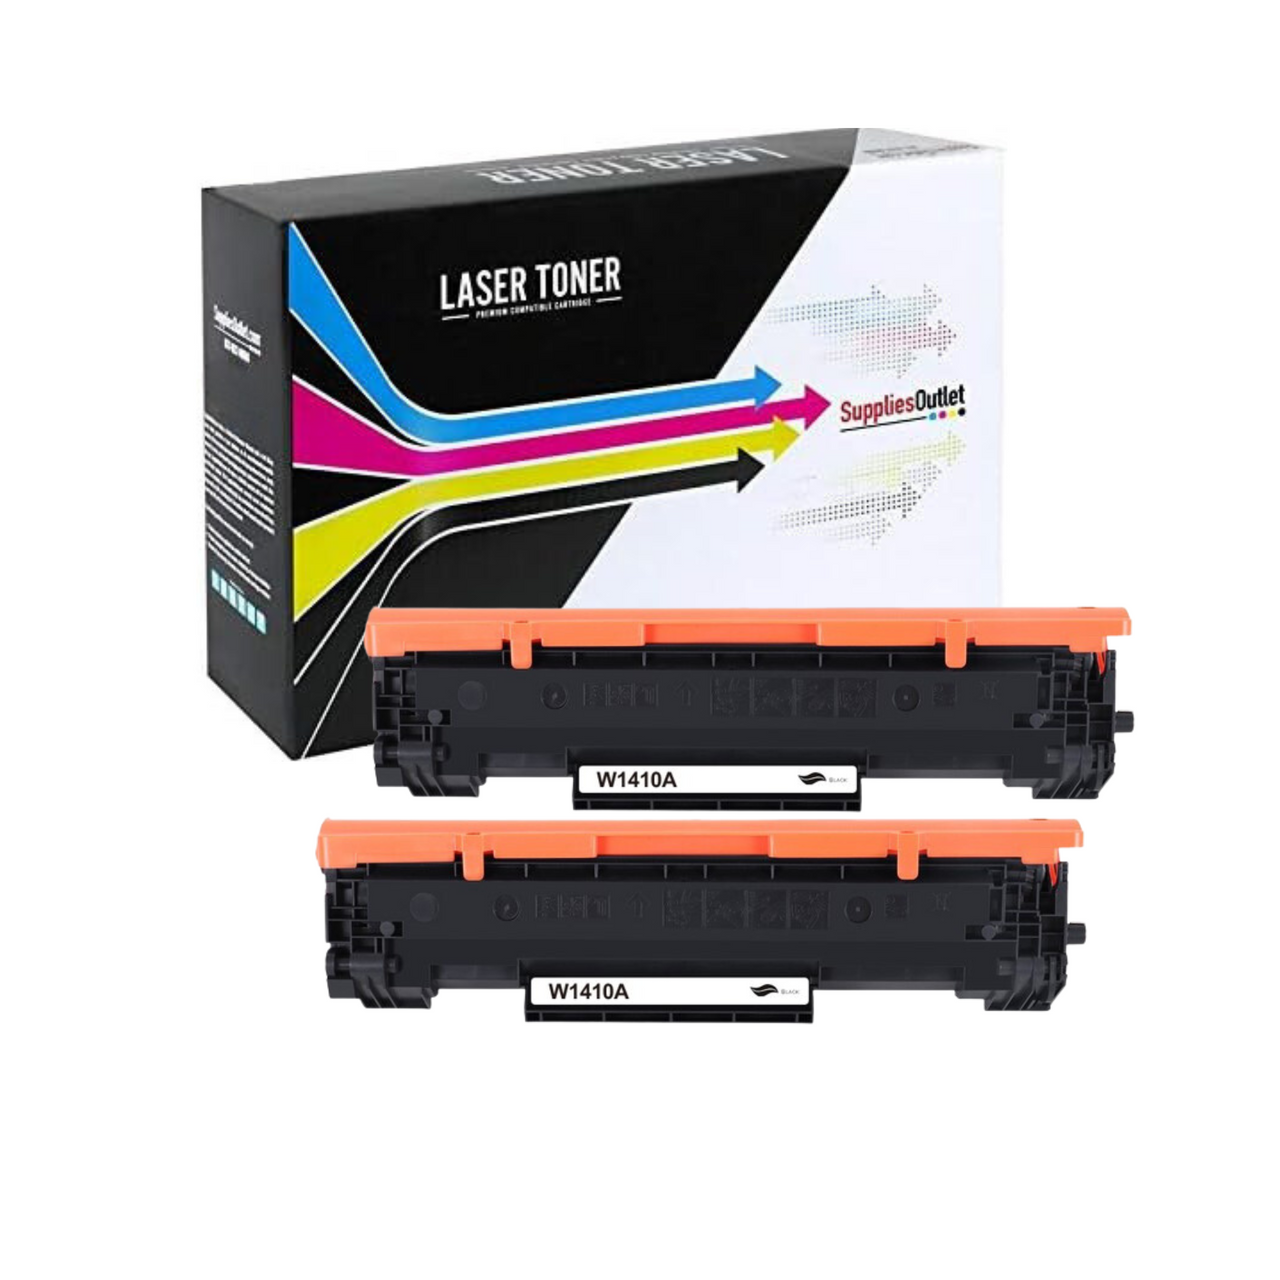 Compatible HP 141A Black Toner Cartridge with CHIP - 950 Page Yield